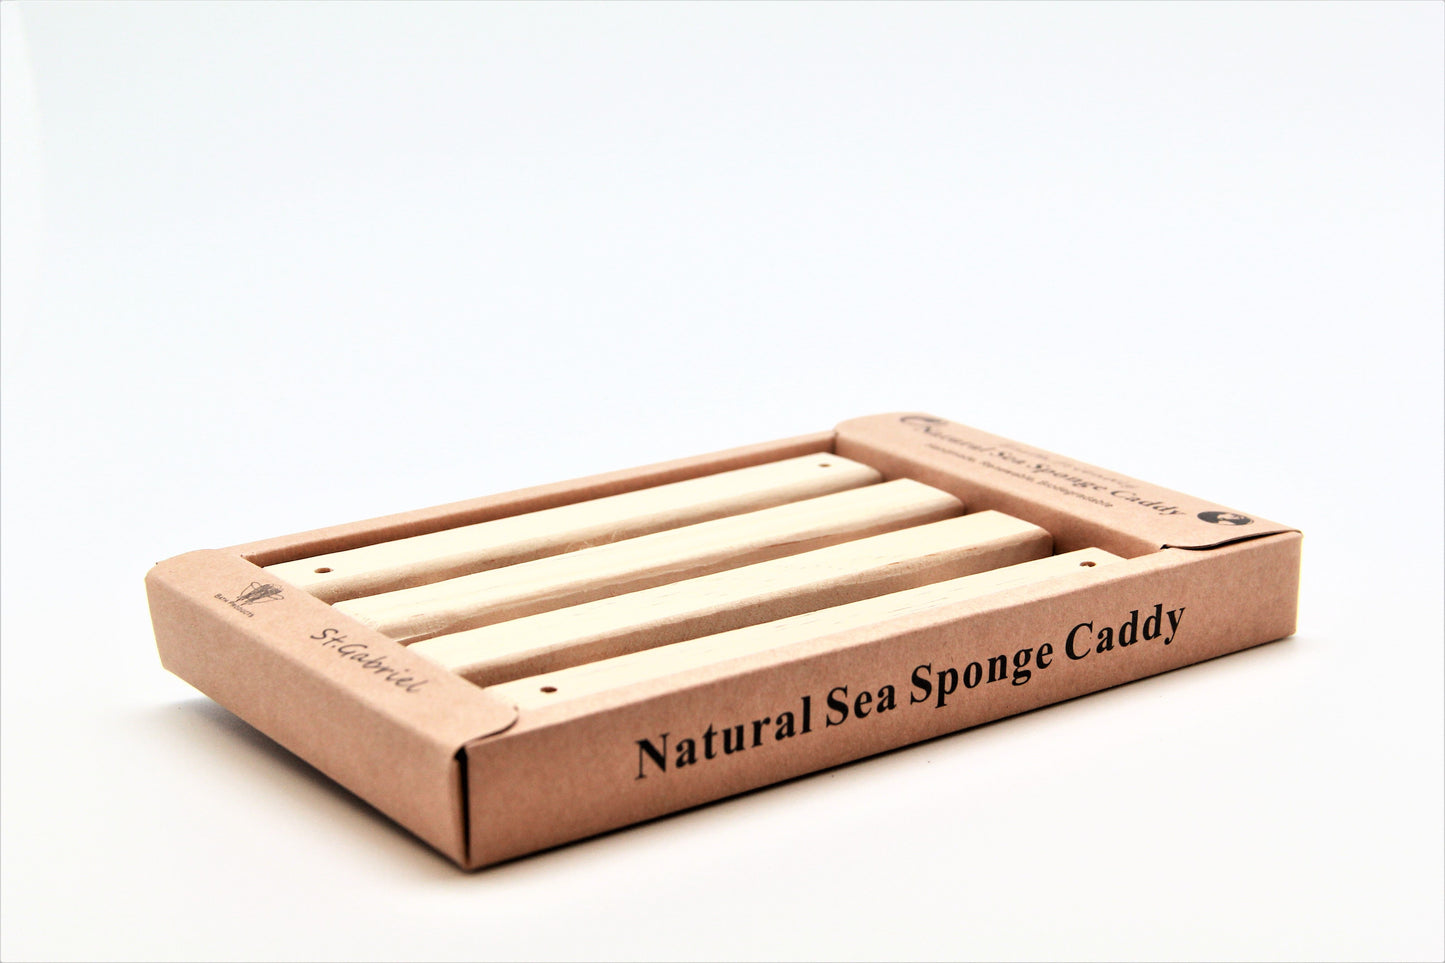 Fawn Lily Botanica | Sea Sponge Bath Caddy | natural, sustainable pine from St. Gabriel